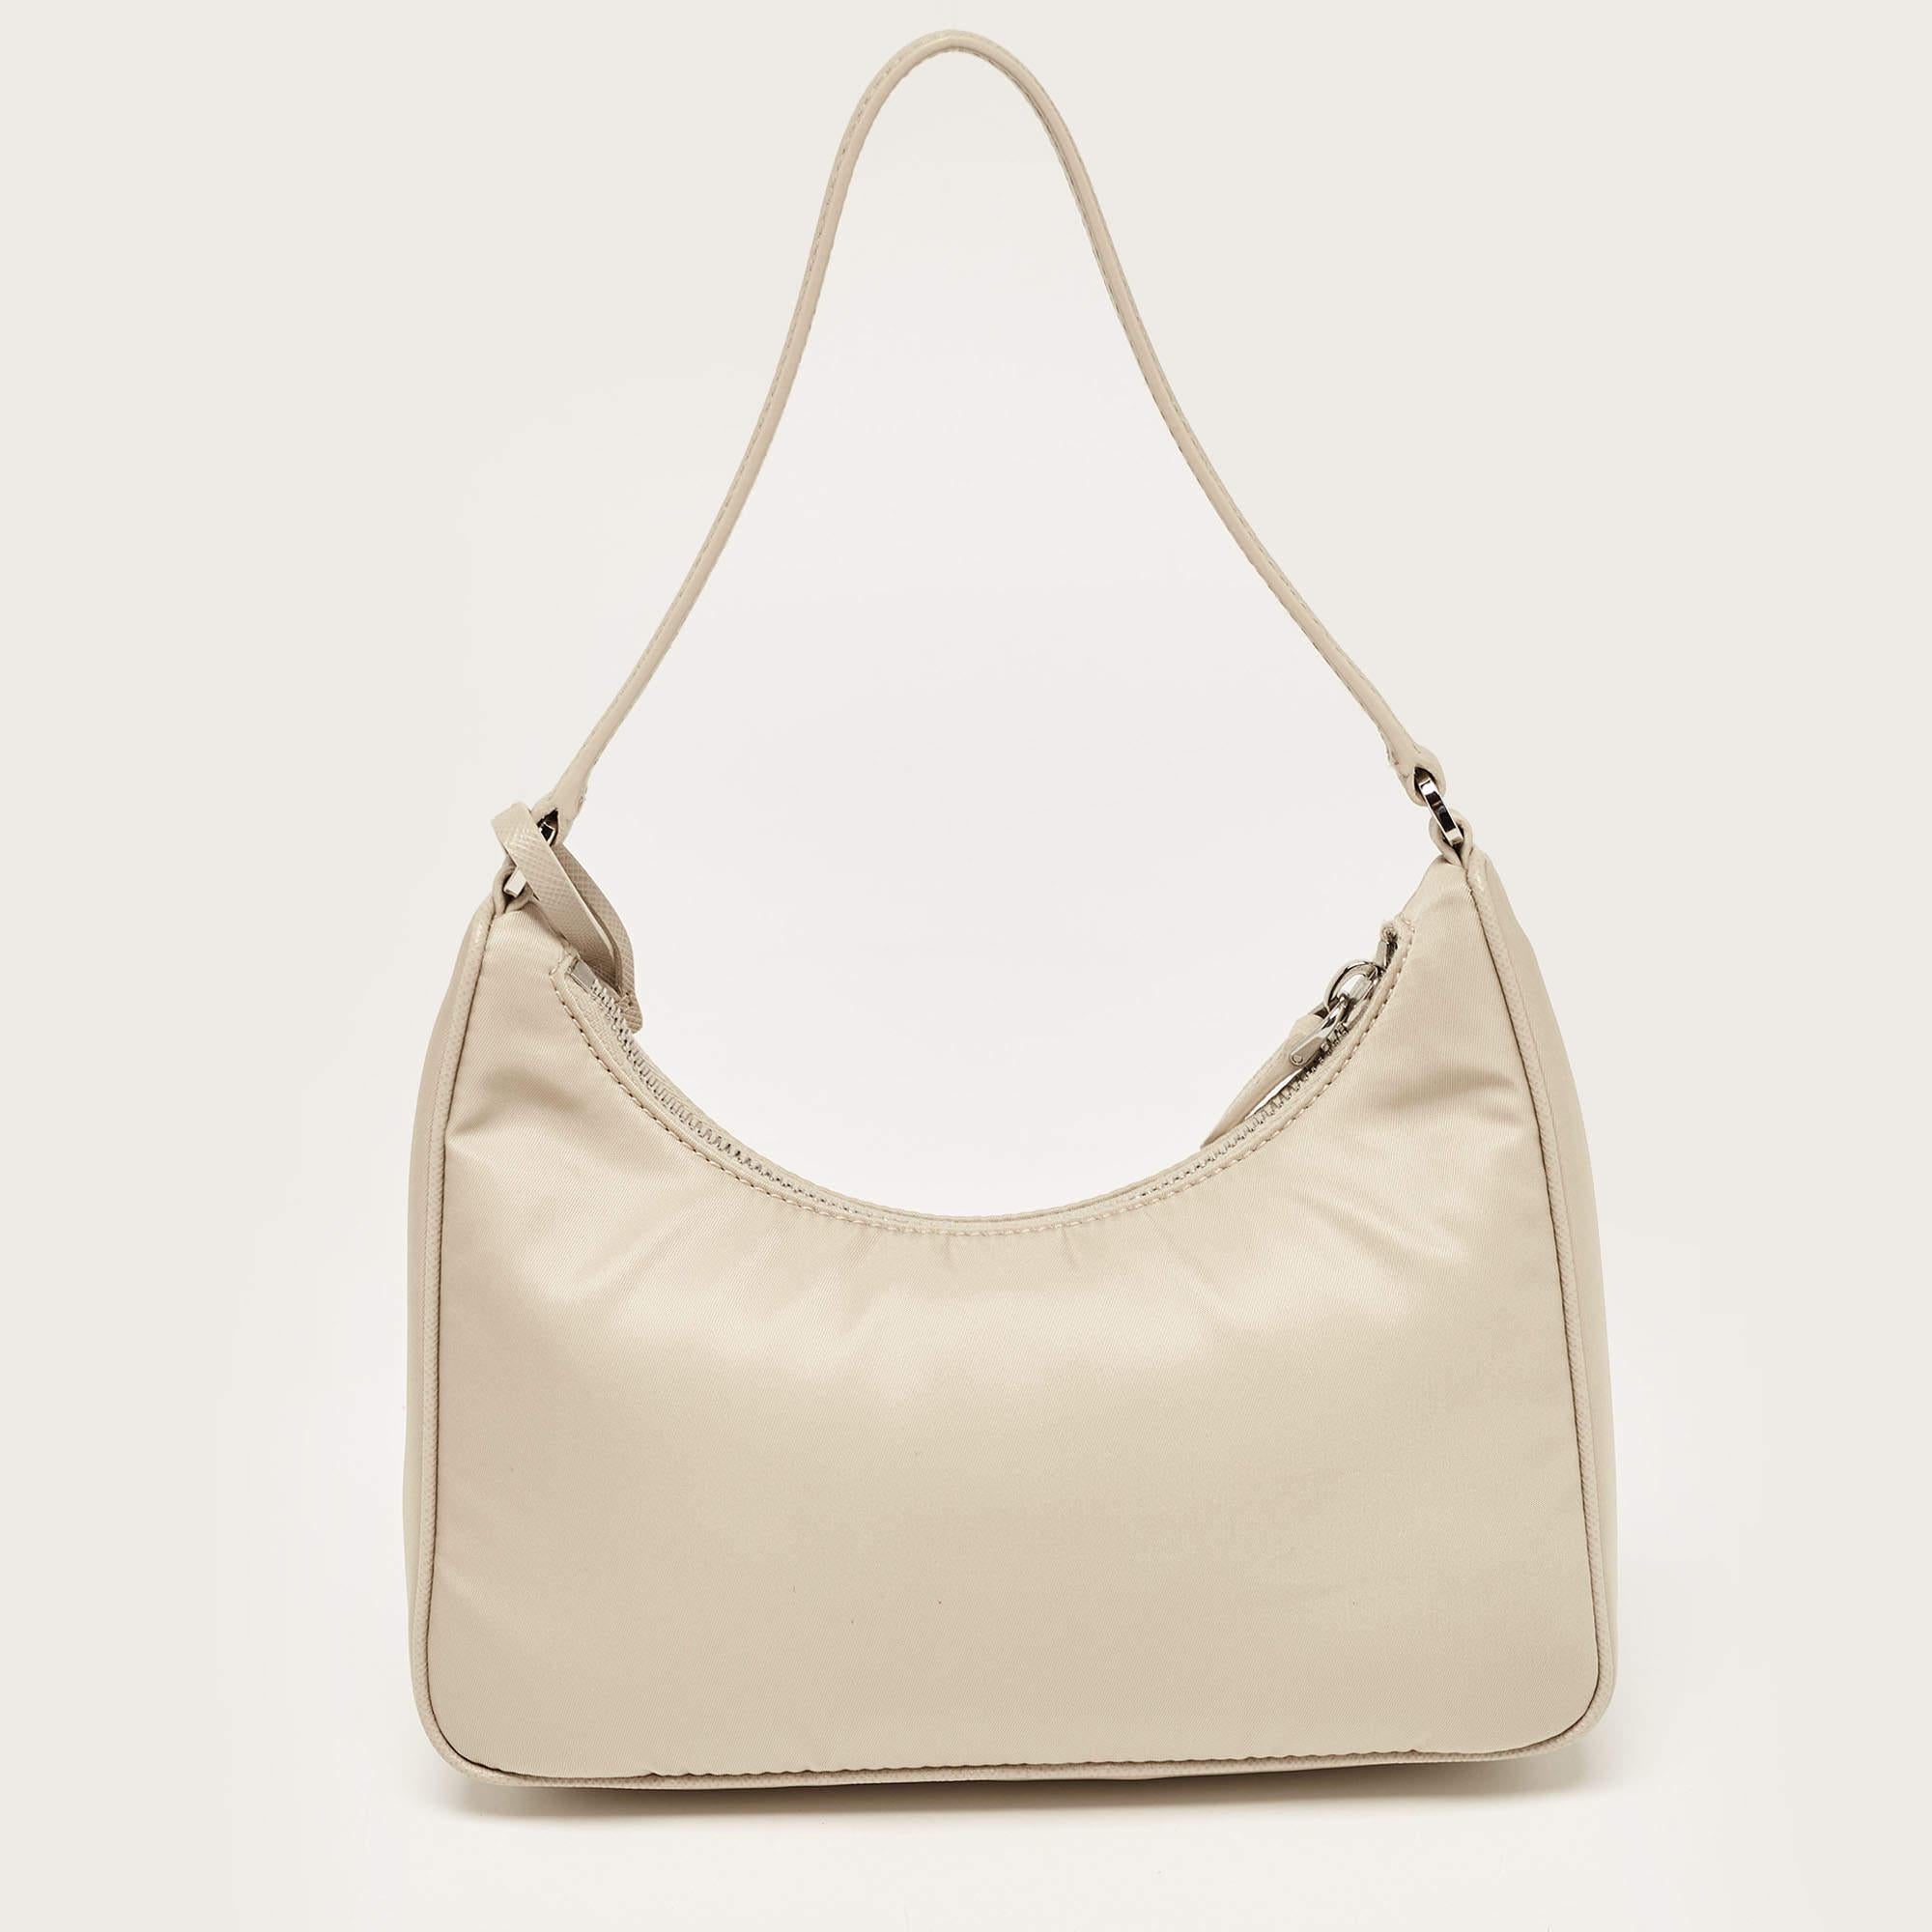 Prada Re-edition 2000 shoulder bag will shine and sparkle from every angle at every step you take. It is a stunning work of art you can parade by hand.

Includes: Original Dustbag

